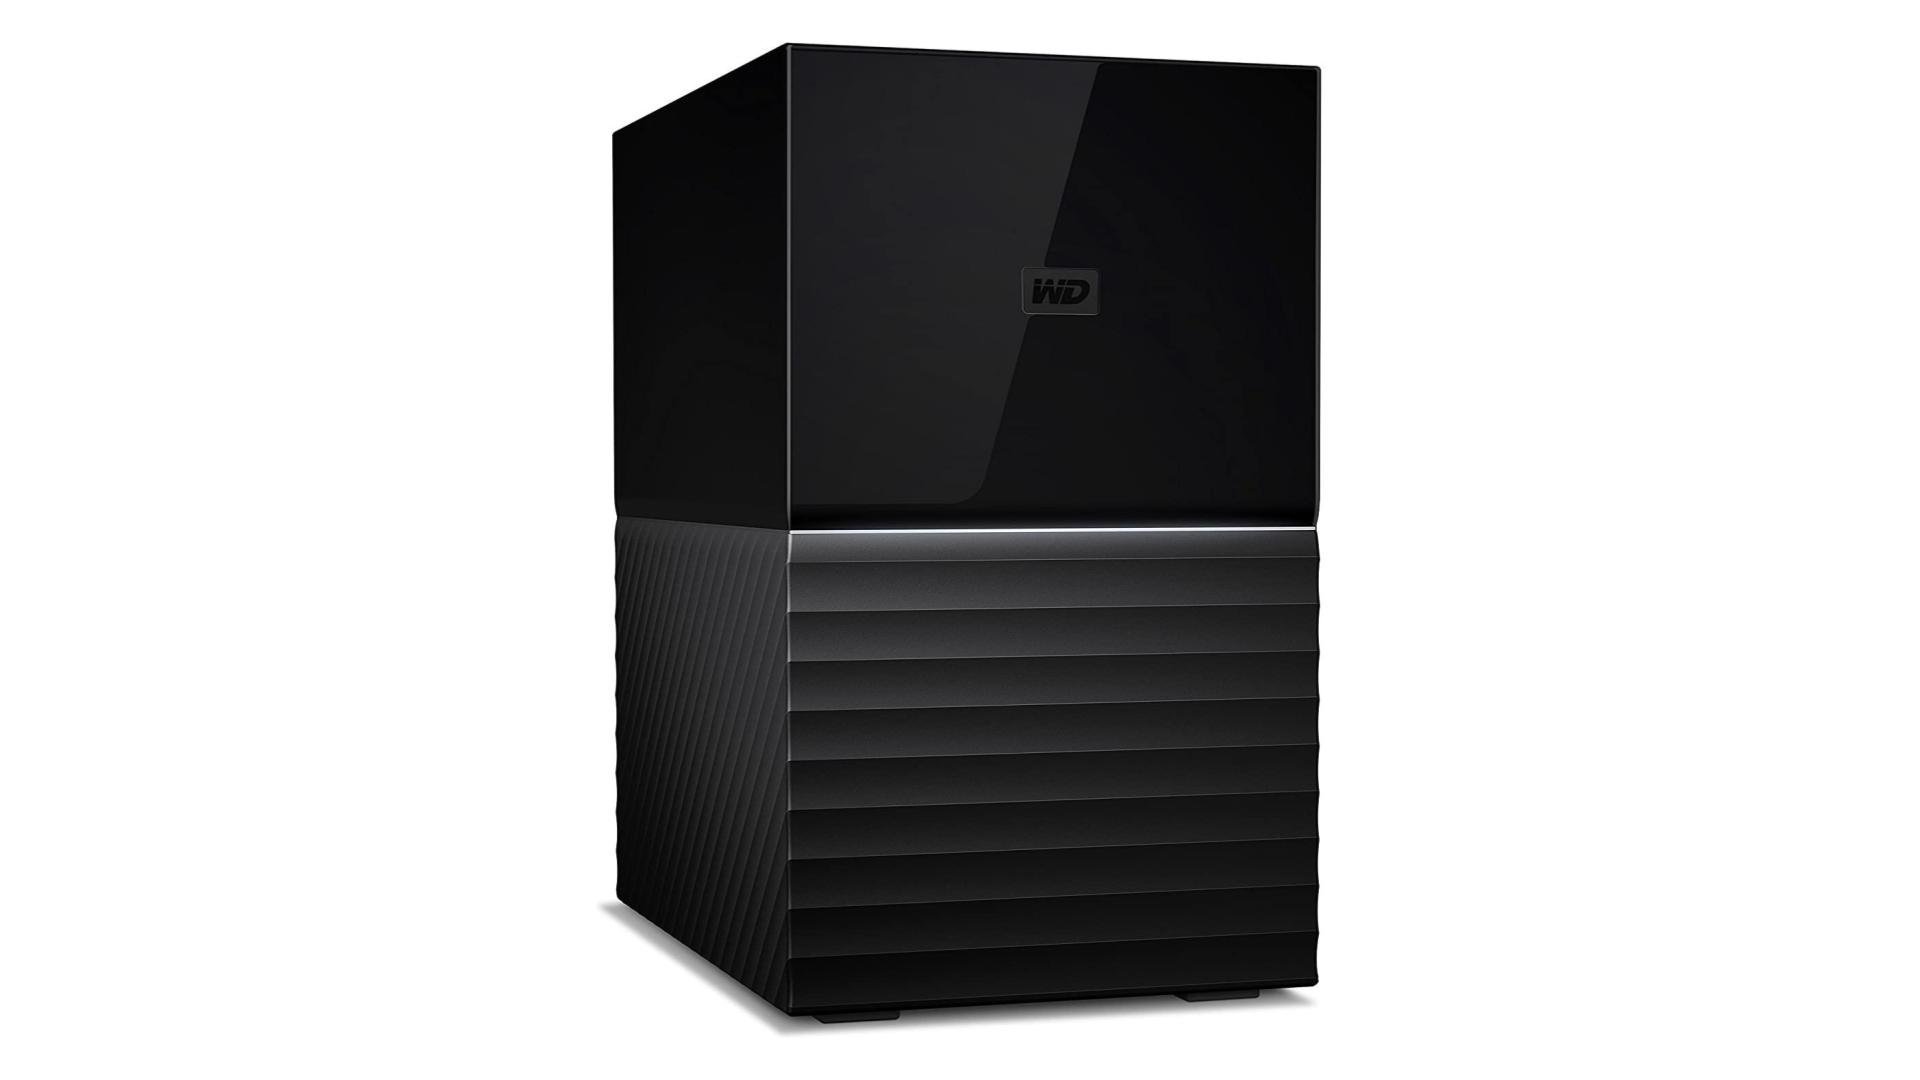 DISQUE DUR EXTERNE WESTERN DIGITAL MY BOOK 3.0 - 1 TO